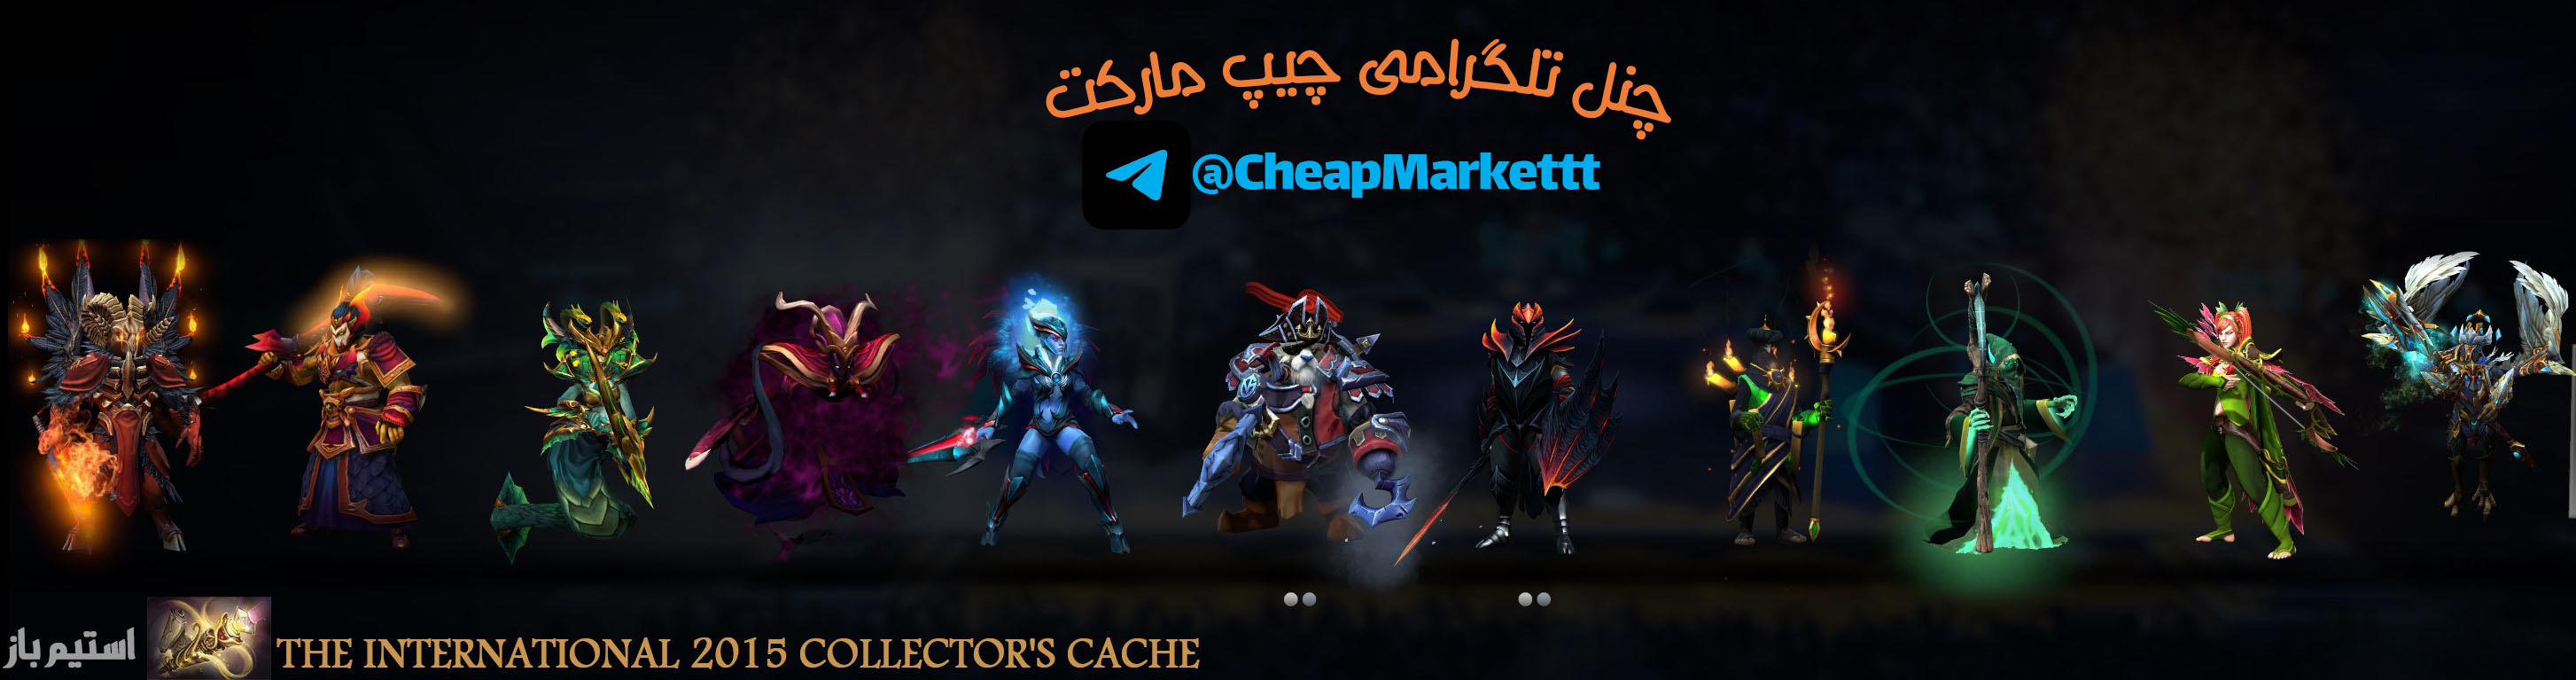 The International 2015 Collector's Cache